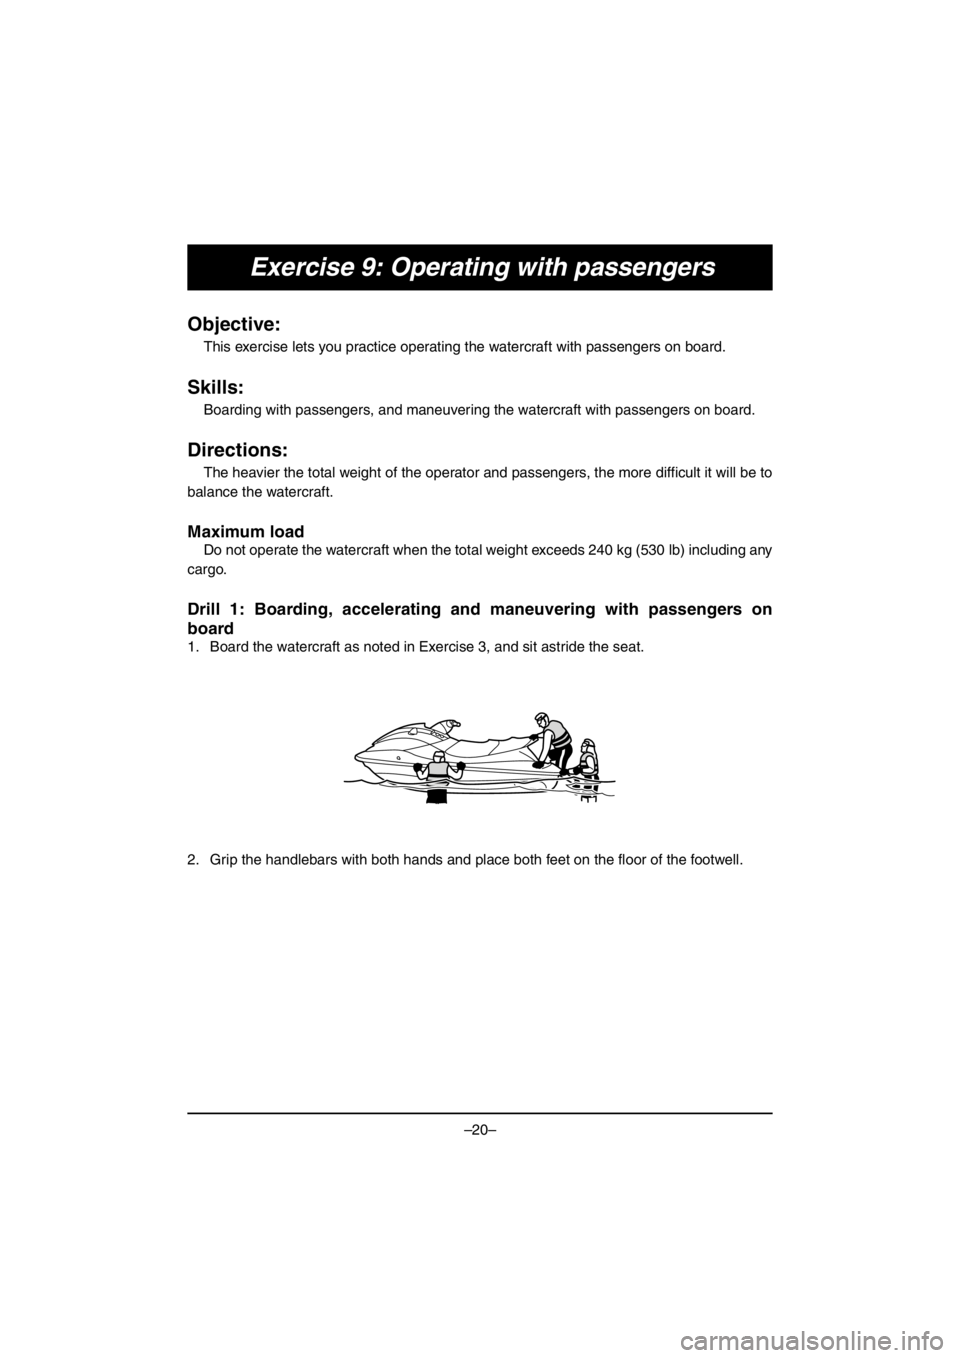 YAMAHA VX CRUISER HO 2016 Owners Manual –20–
Exercise 9: Operating with passengers
Objective:
This exercise lets you practice operating the watercraft with passengers on board.
Skills:
Boarding with passengers, and maneuvering the water